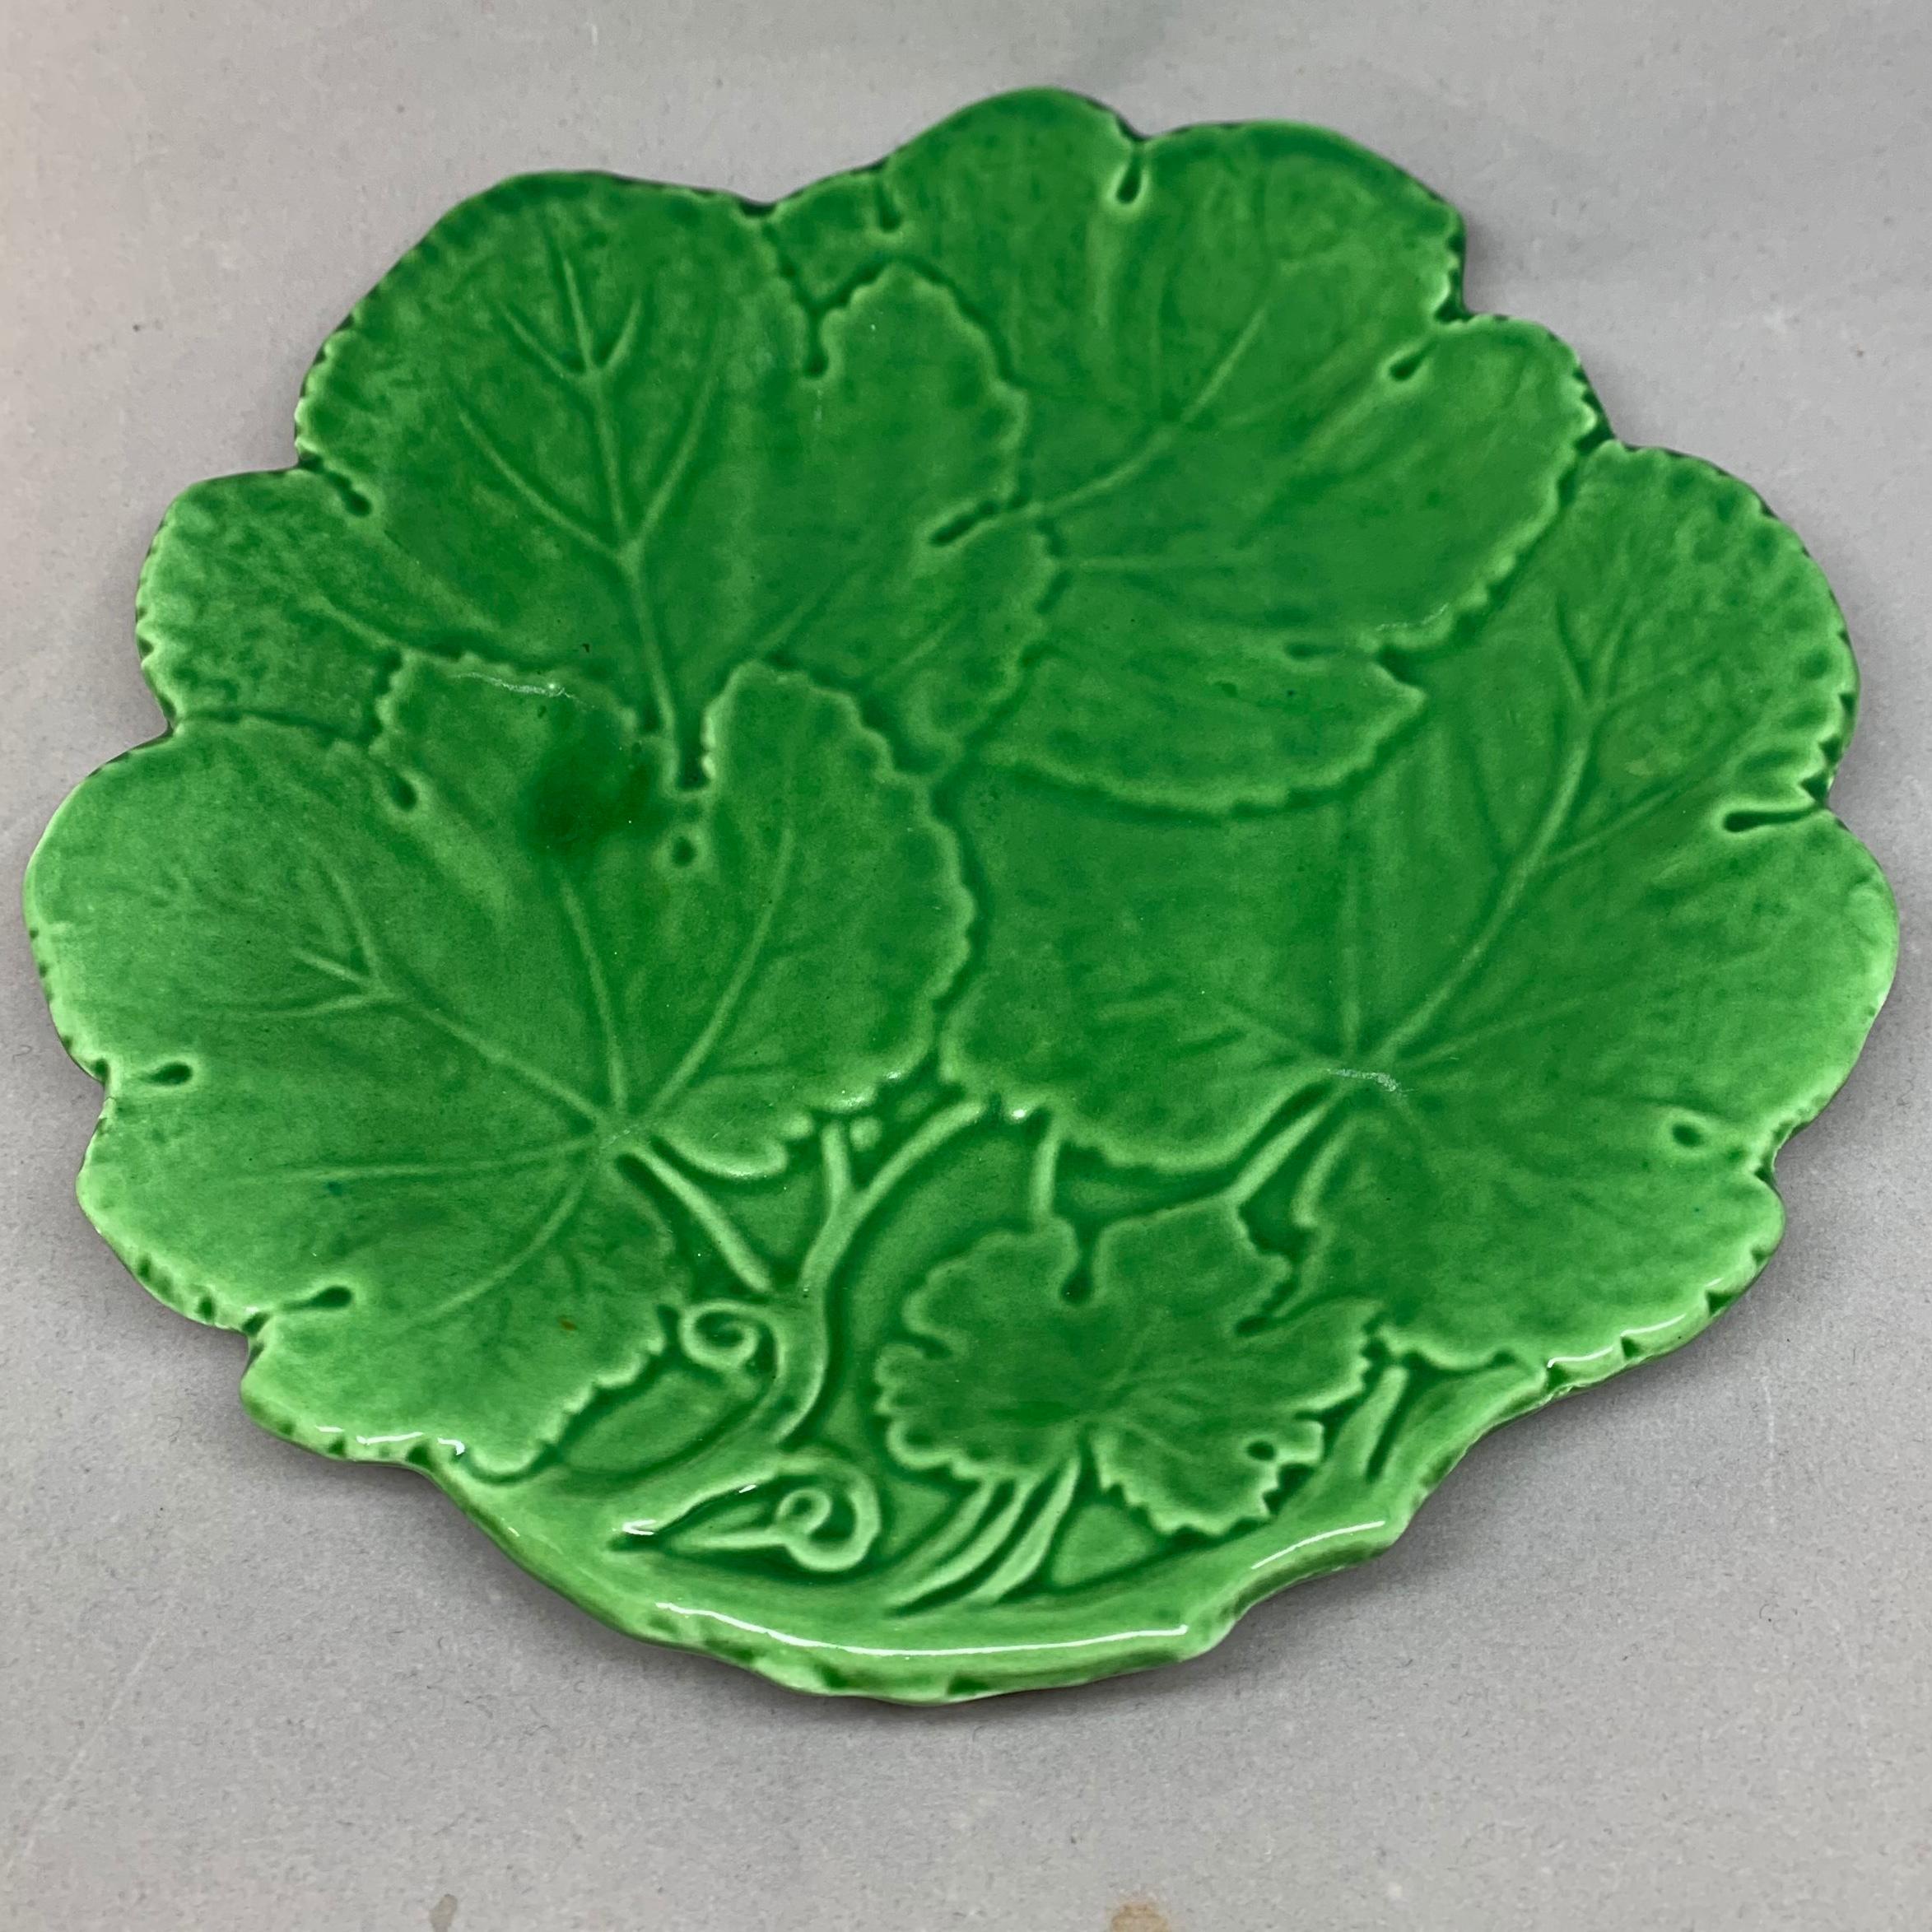 Set of eight Italian green leaf plates. Eight midcentury molded leaf pottery appetizer or hors d'oeuvres plates Italy, 1970s
Dimensions: 8